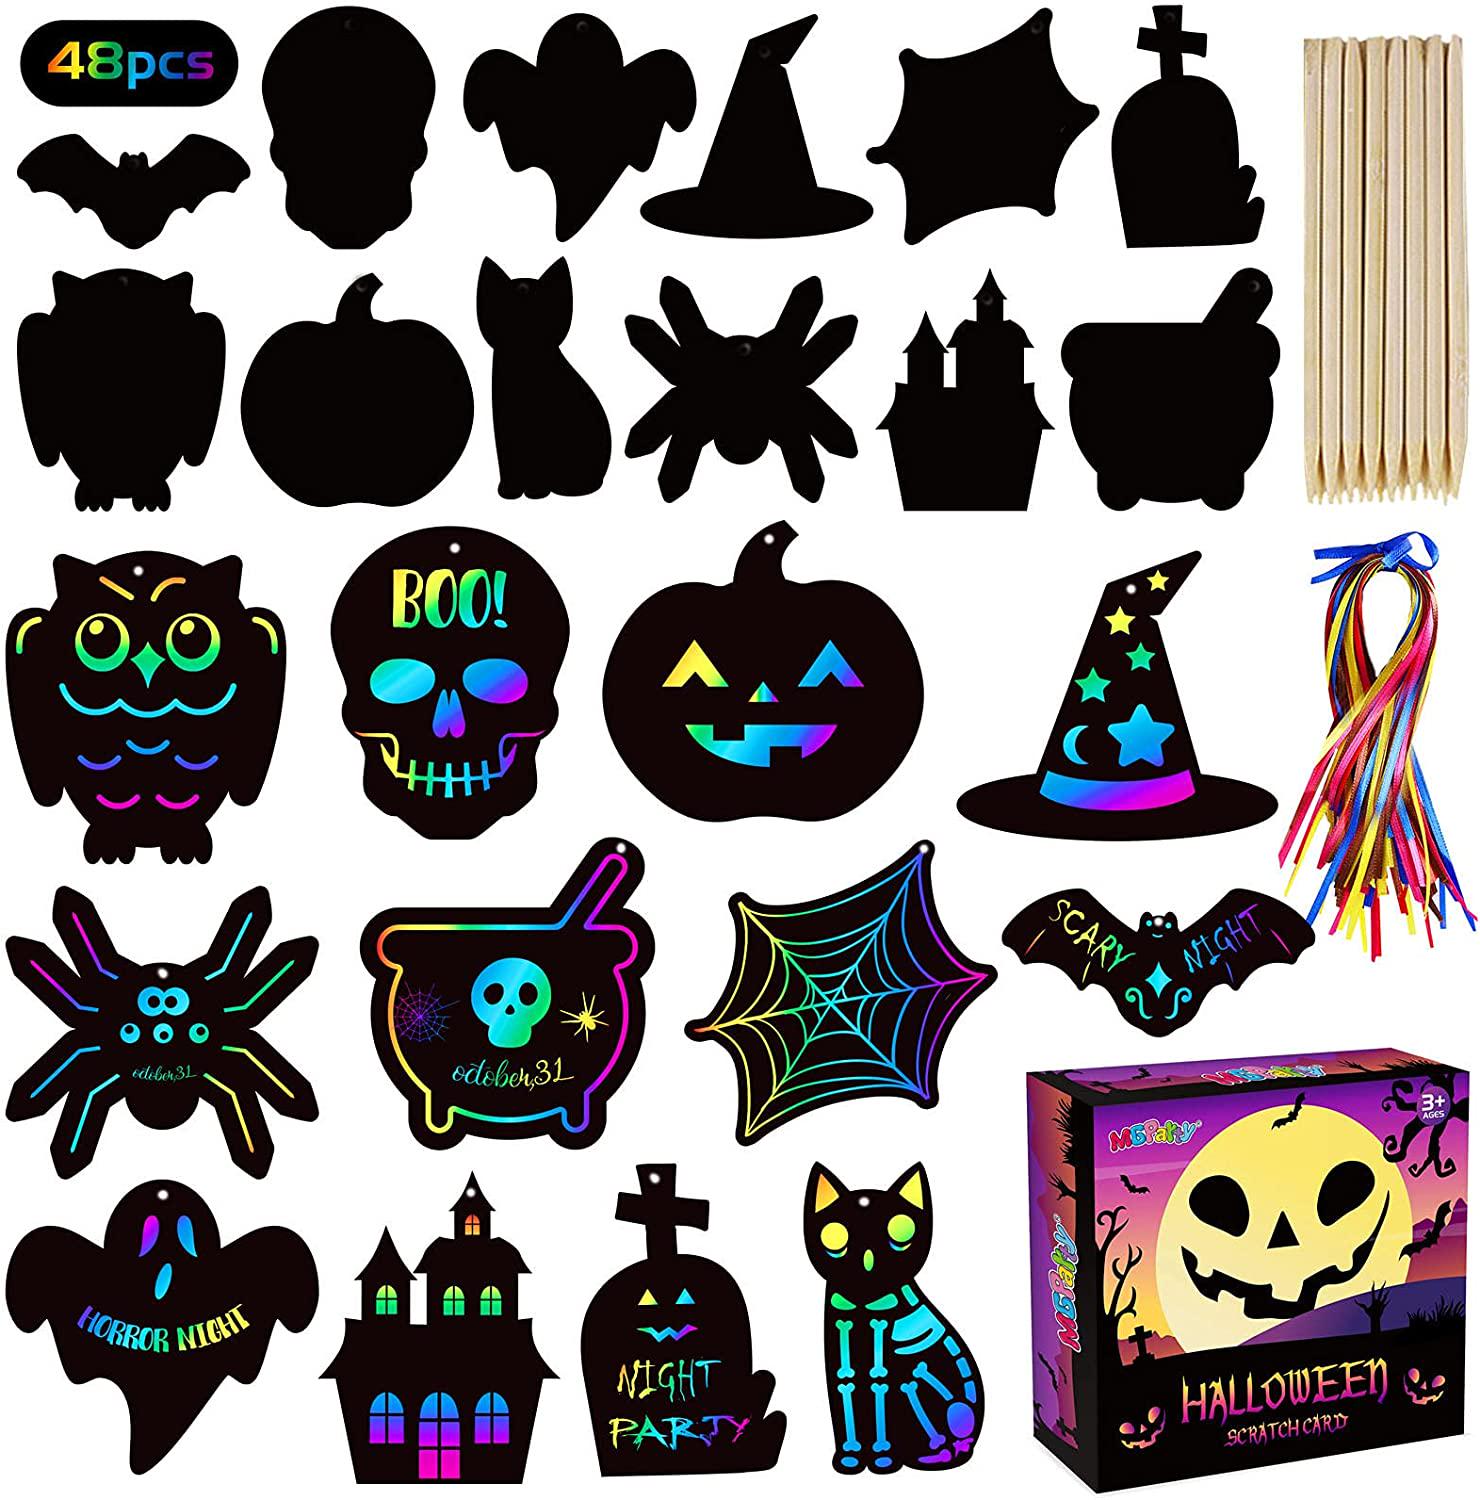 MGparty, MGparty Scratch Paper Craft for Kids - 48 Pcs Halloween Magic Rainbow Scratch Paper Off Cards Set for Kids Crafts Arts Supplies Halloween Ornaments Party Games Halloween Birthday Gift